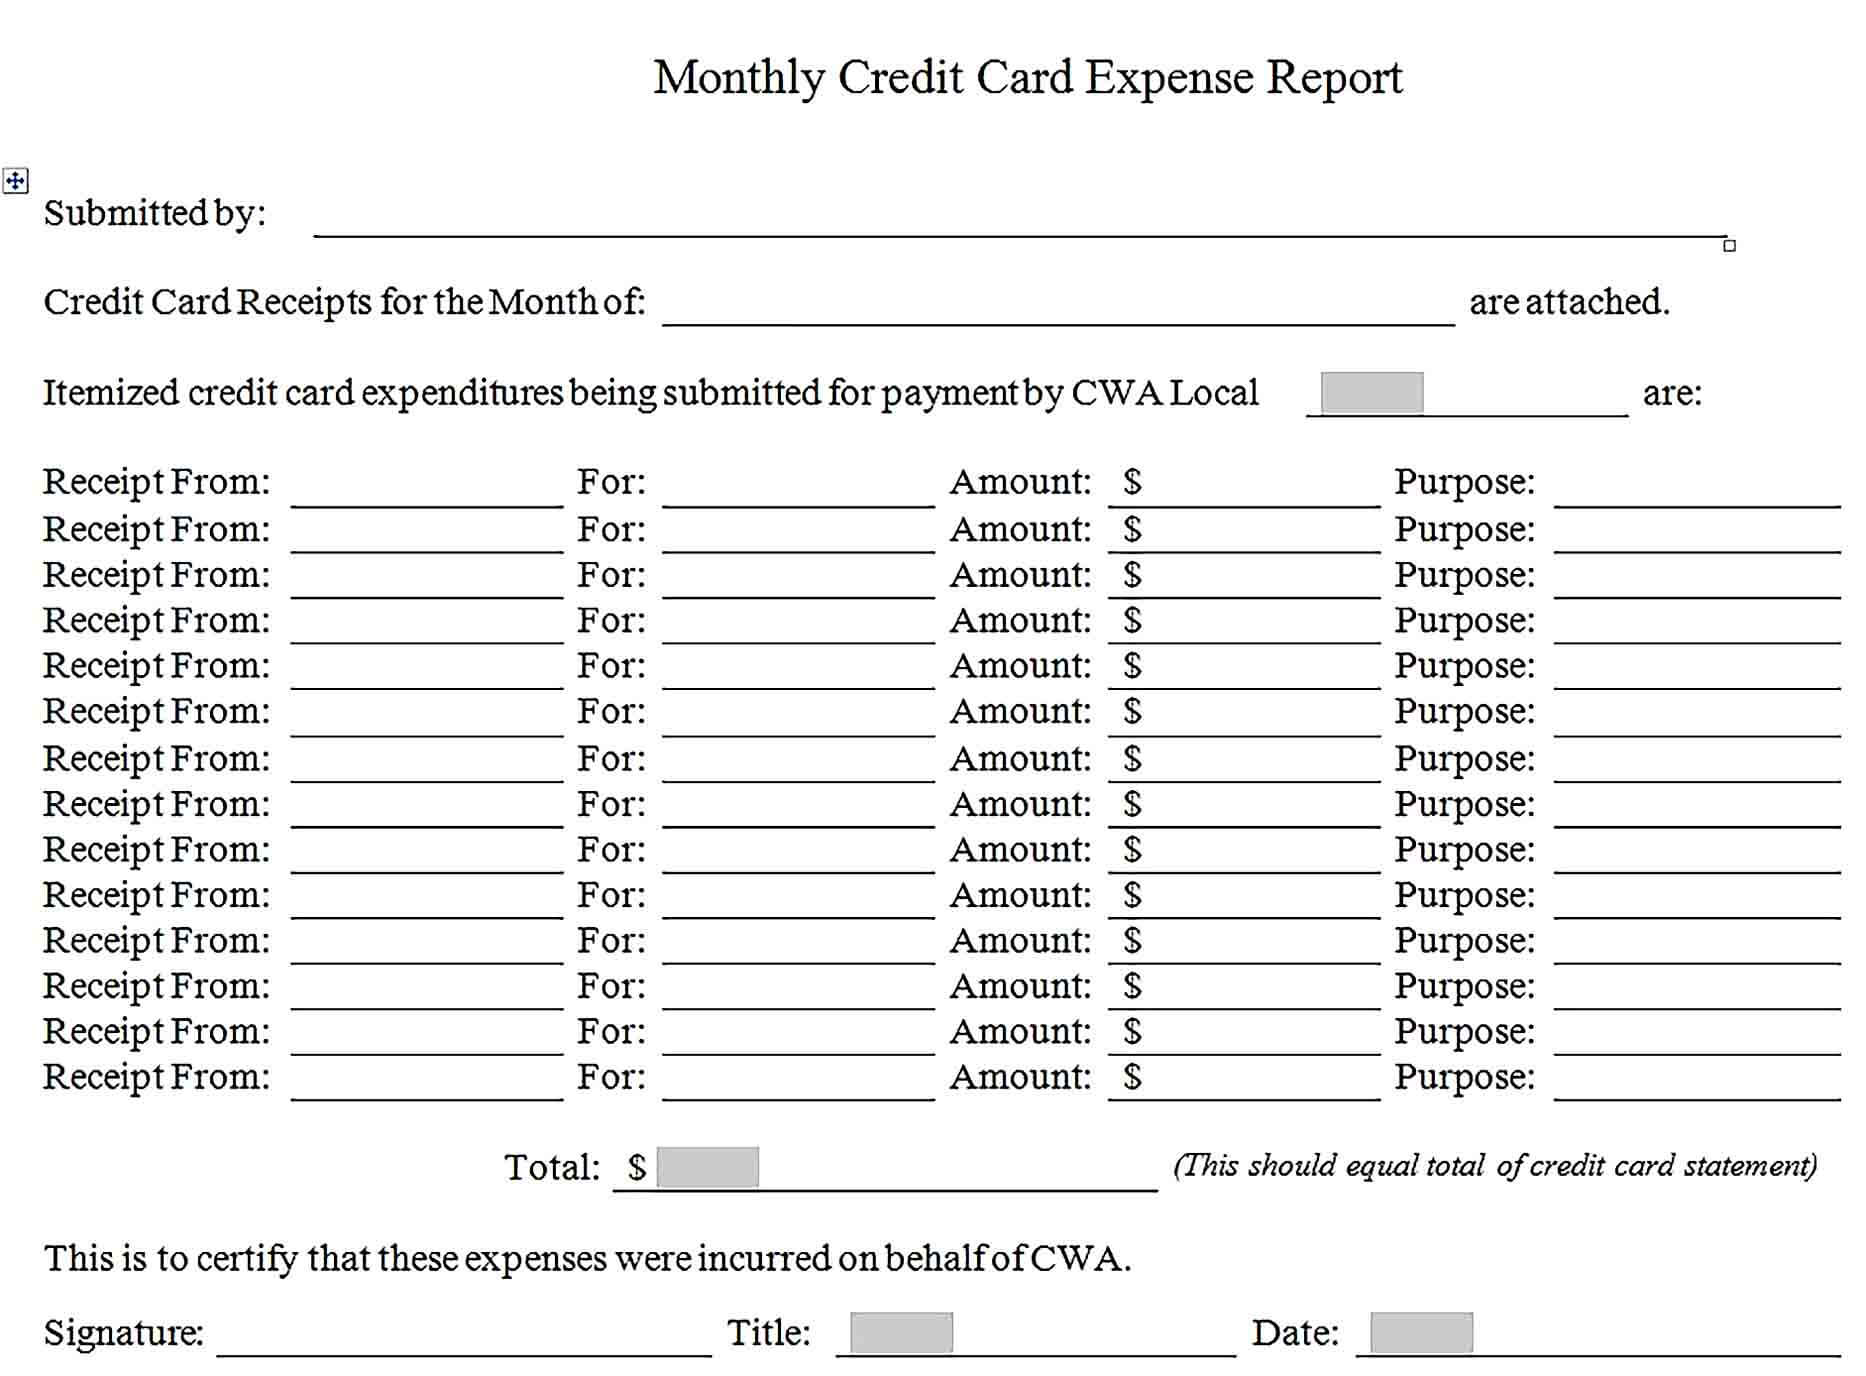 Sample Credit Card Expense Report Template